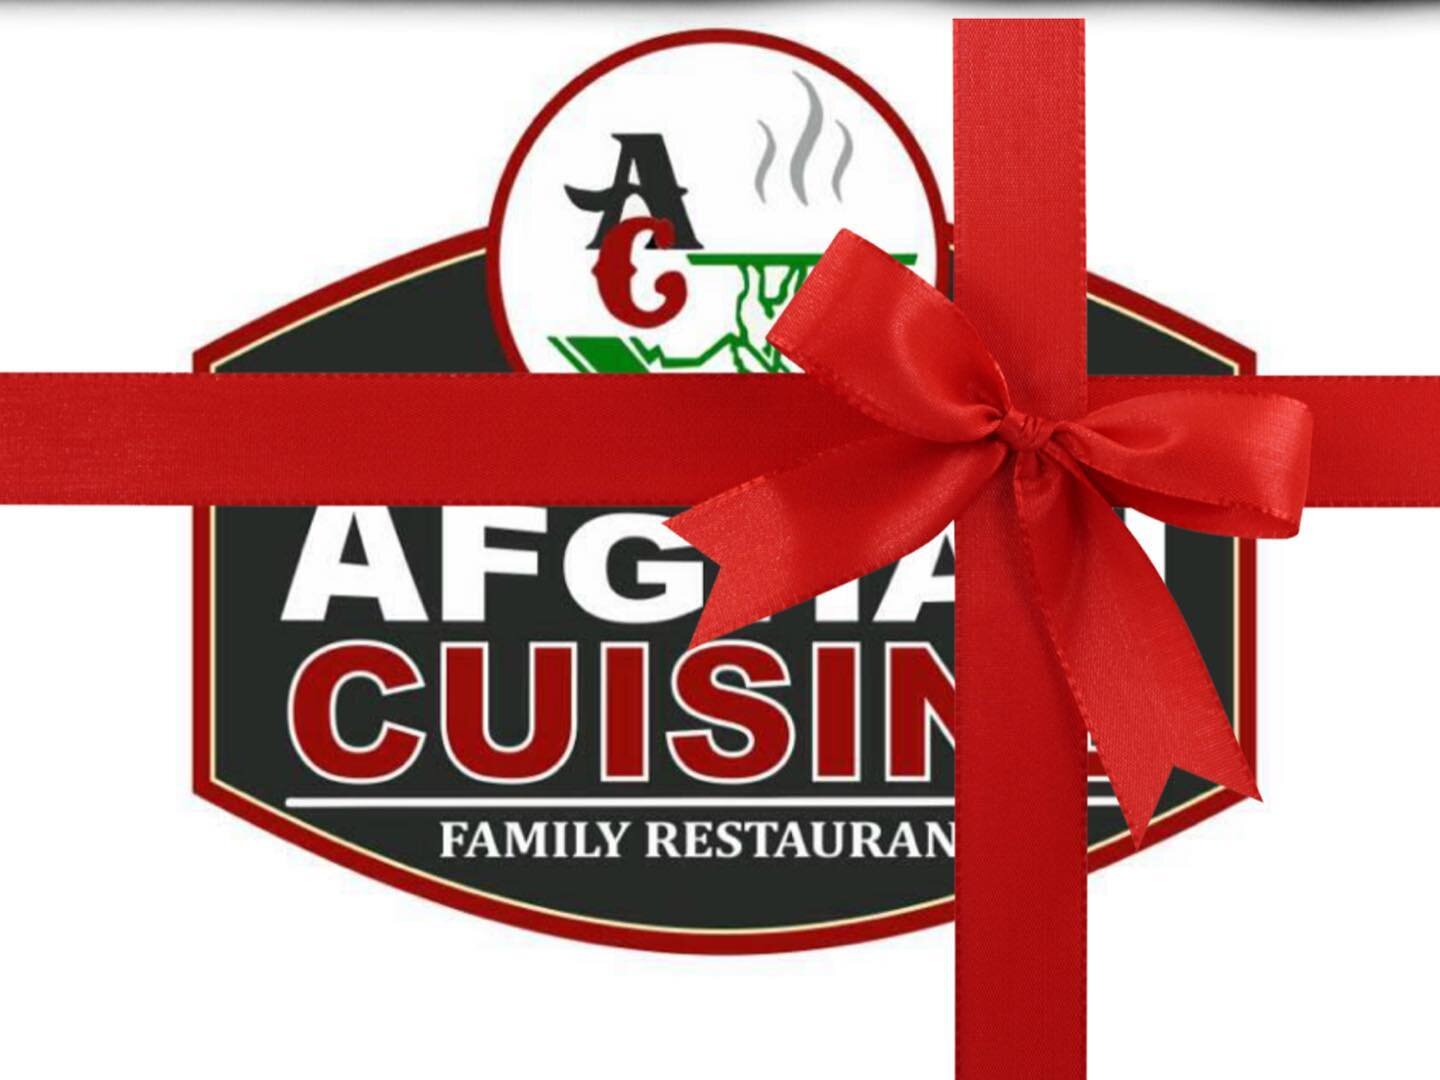 Just in time for Mother&rsquo;s Day! Perfect way to say I love you mom! Gift a virtual gift card to Afghan cuisine through this link! 
Happy Mother&rsquo;s Day to all the wonderful mothers!